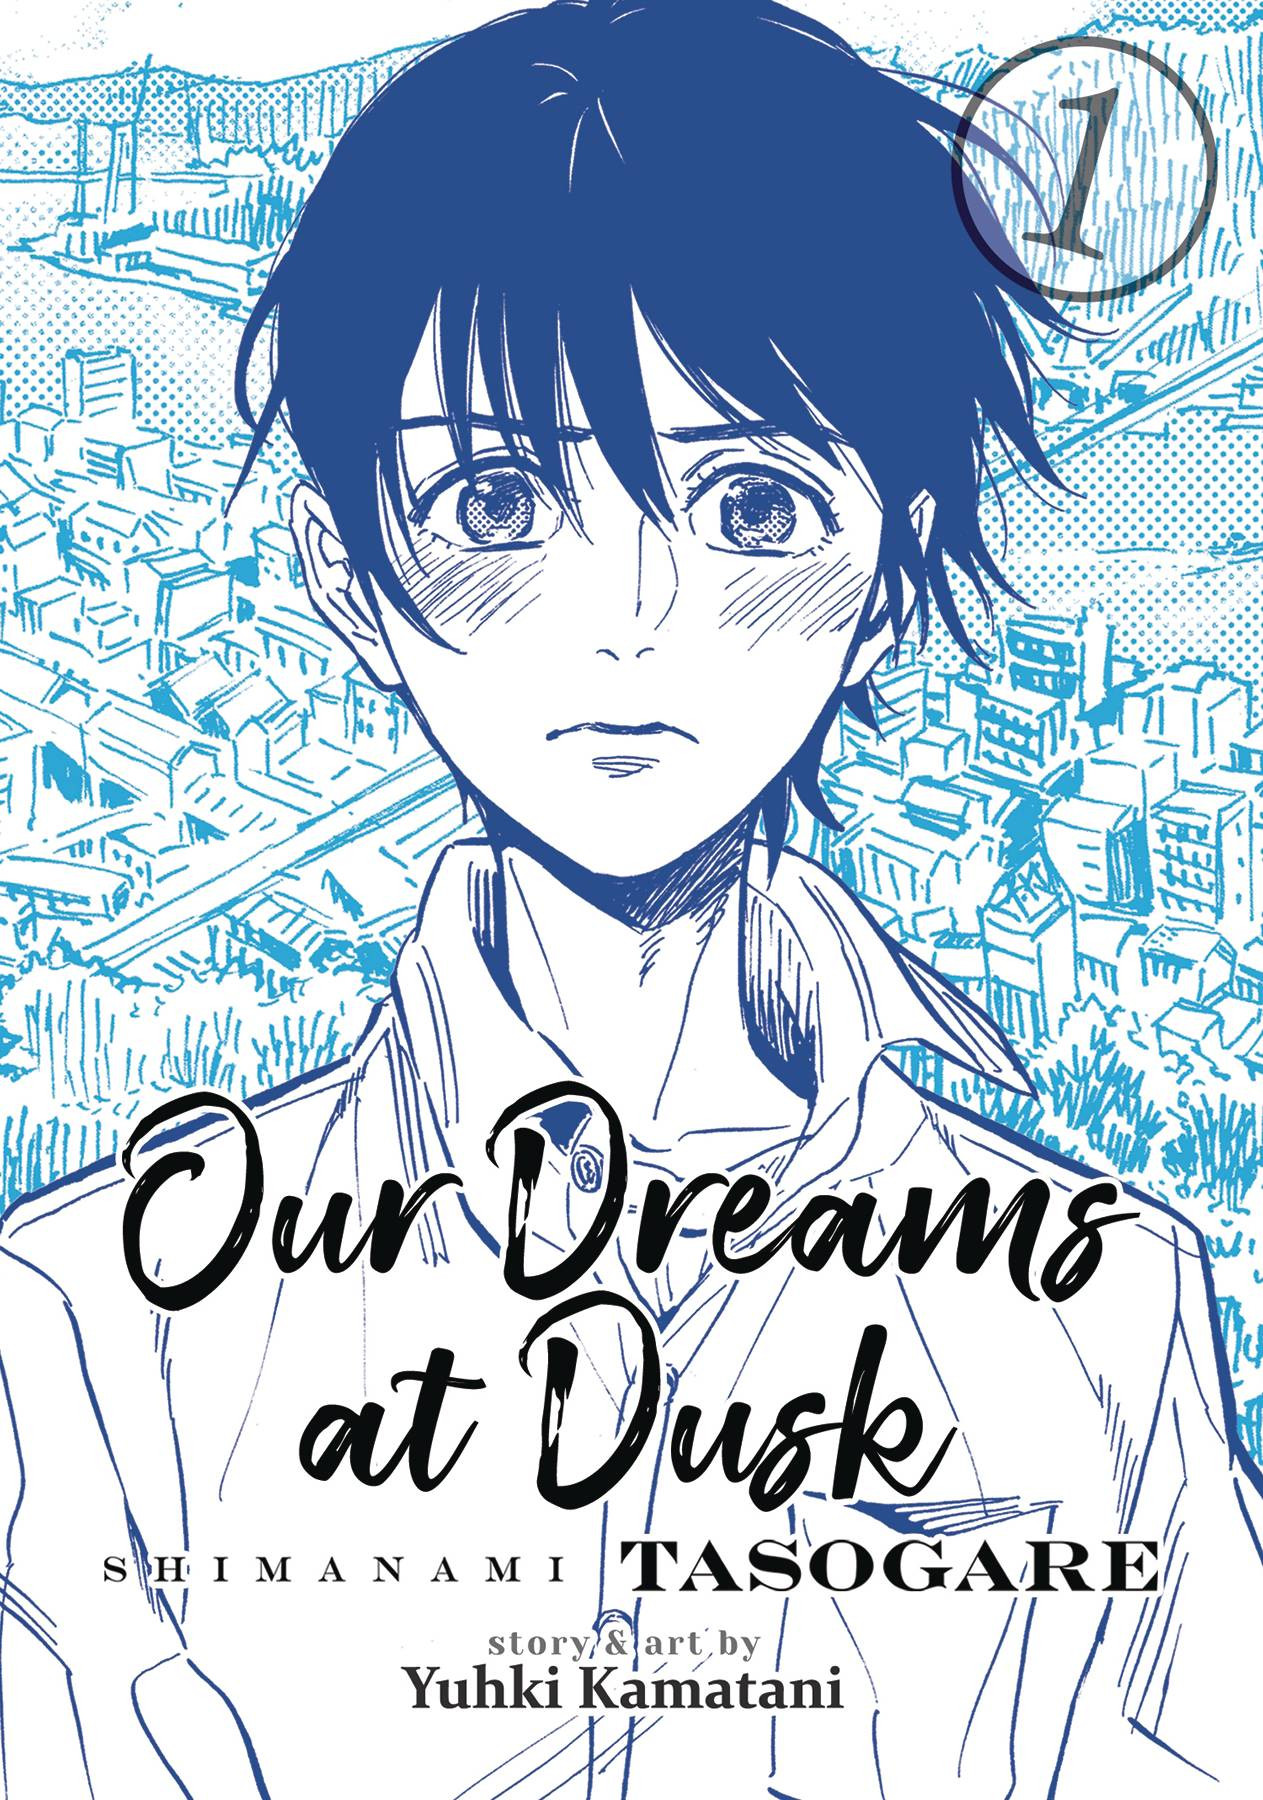 50 queer comics: Our Dreams At Dusk